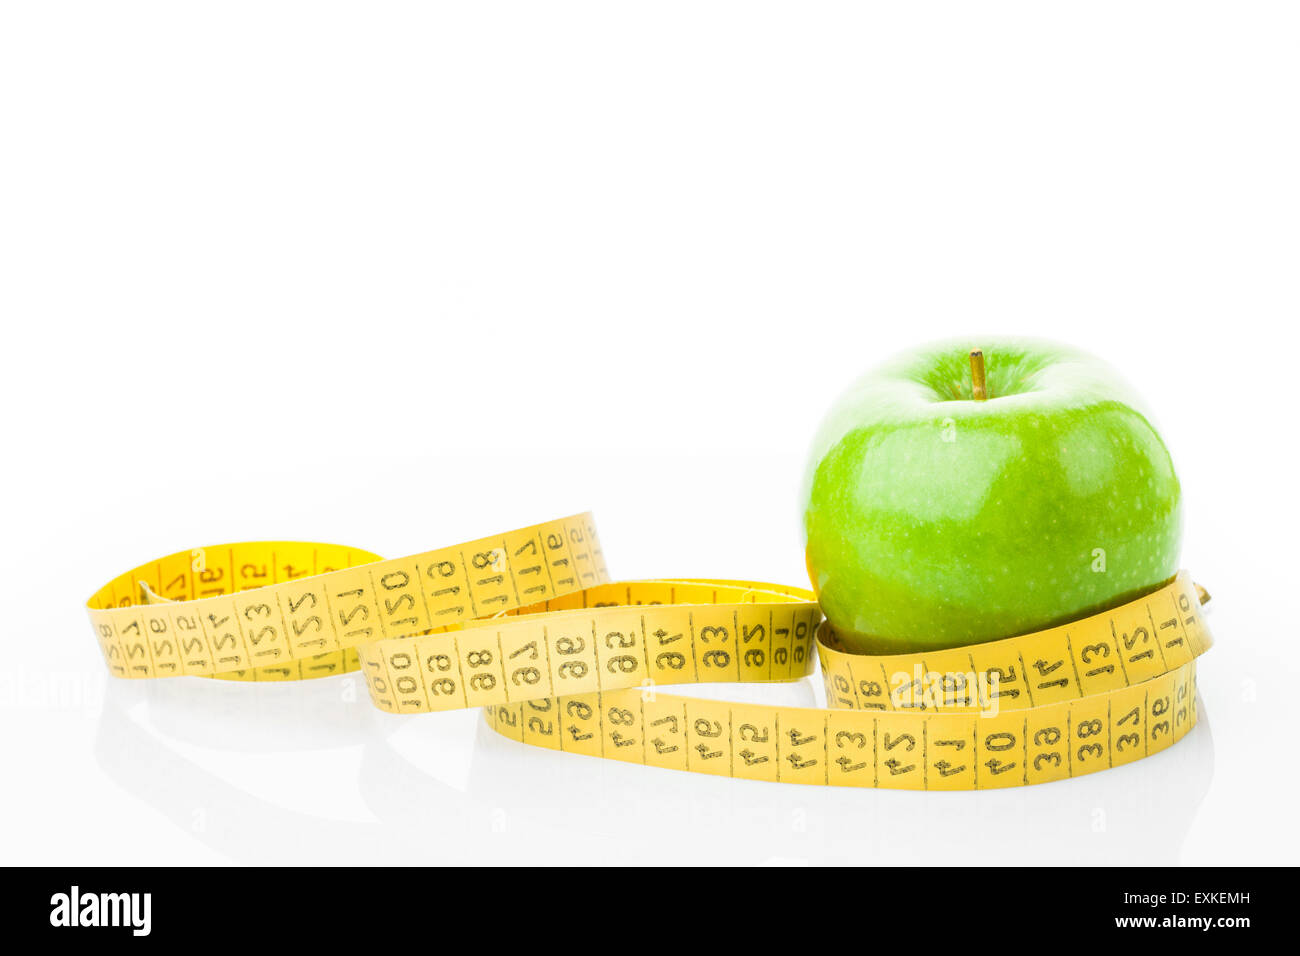 Green apple with measuring tape on white background Stock Photo